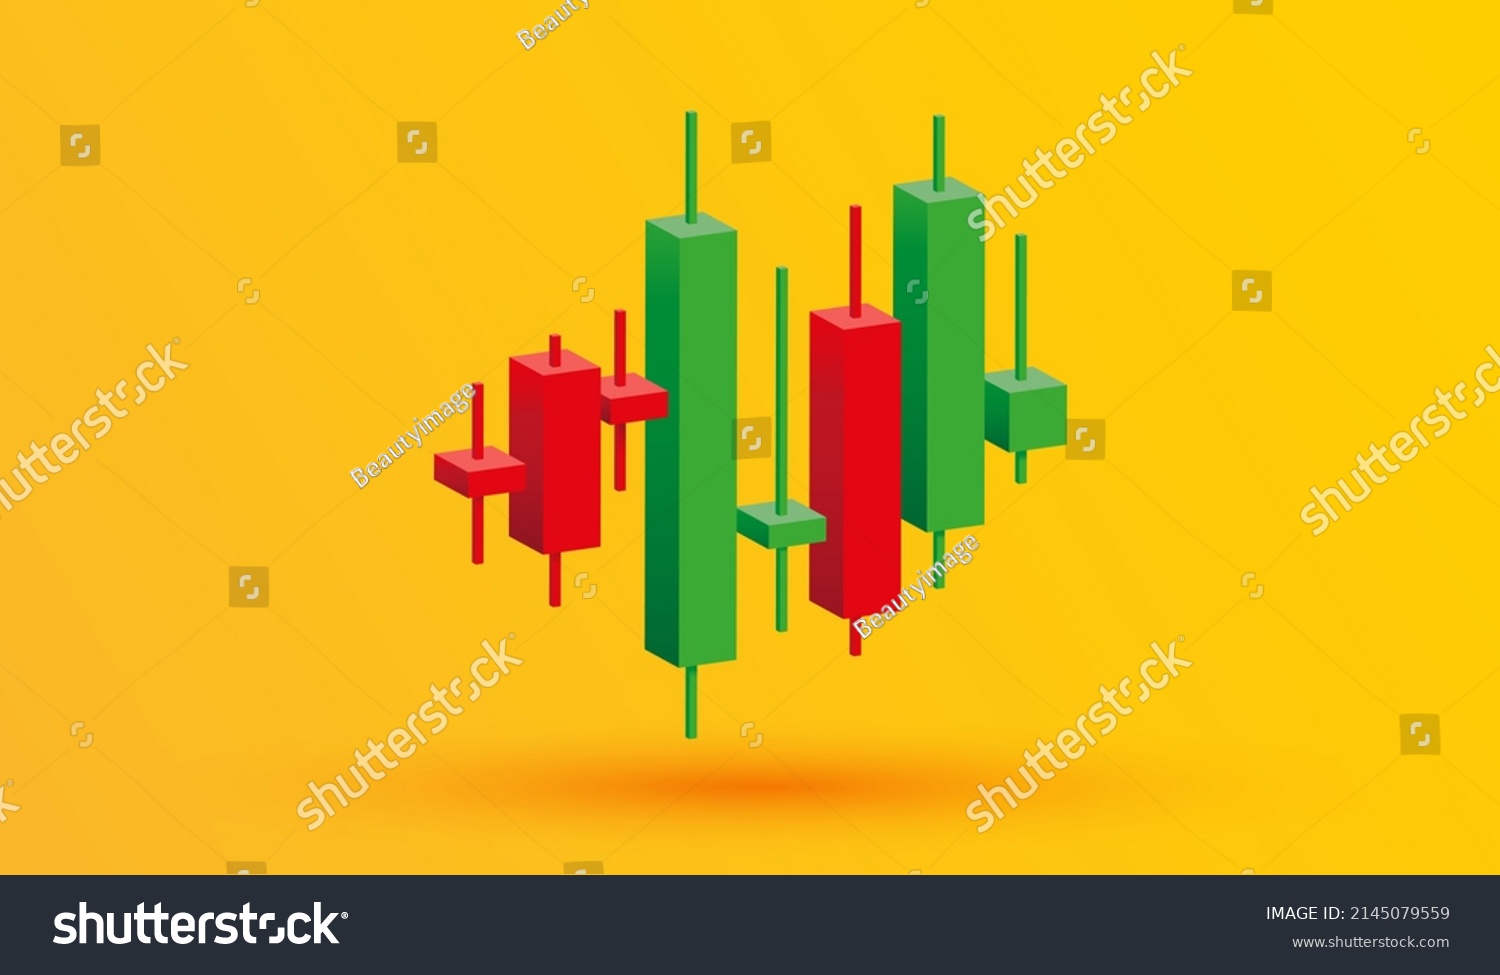 SVG of Growth stock diagram financial graph with candlestick icon trading stock or forex 3d icon vector illustration style svg